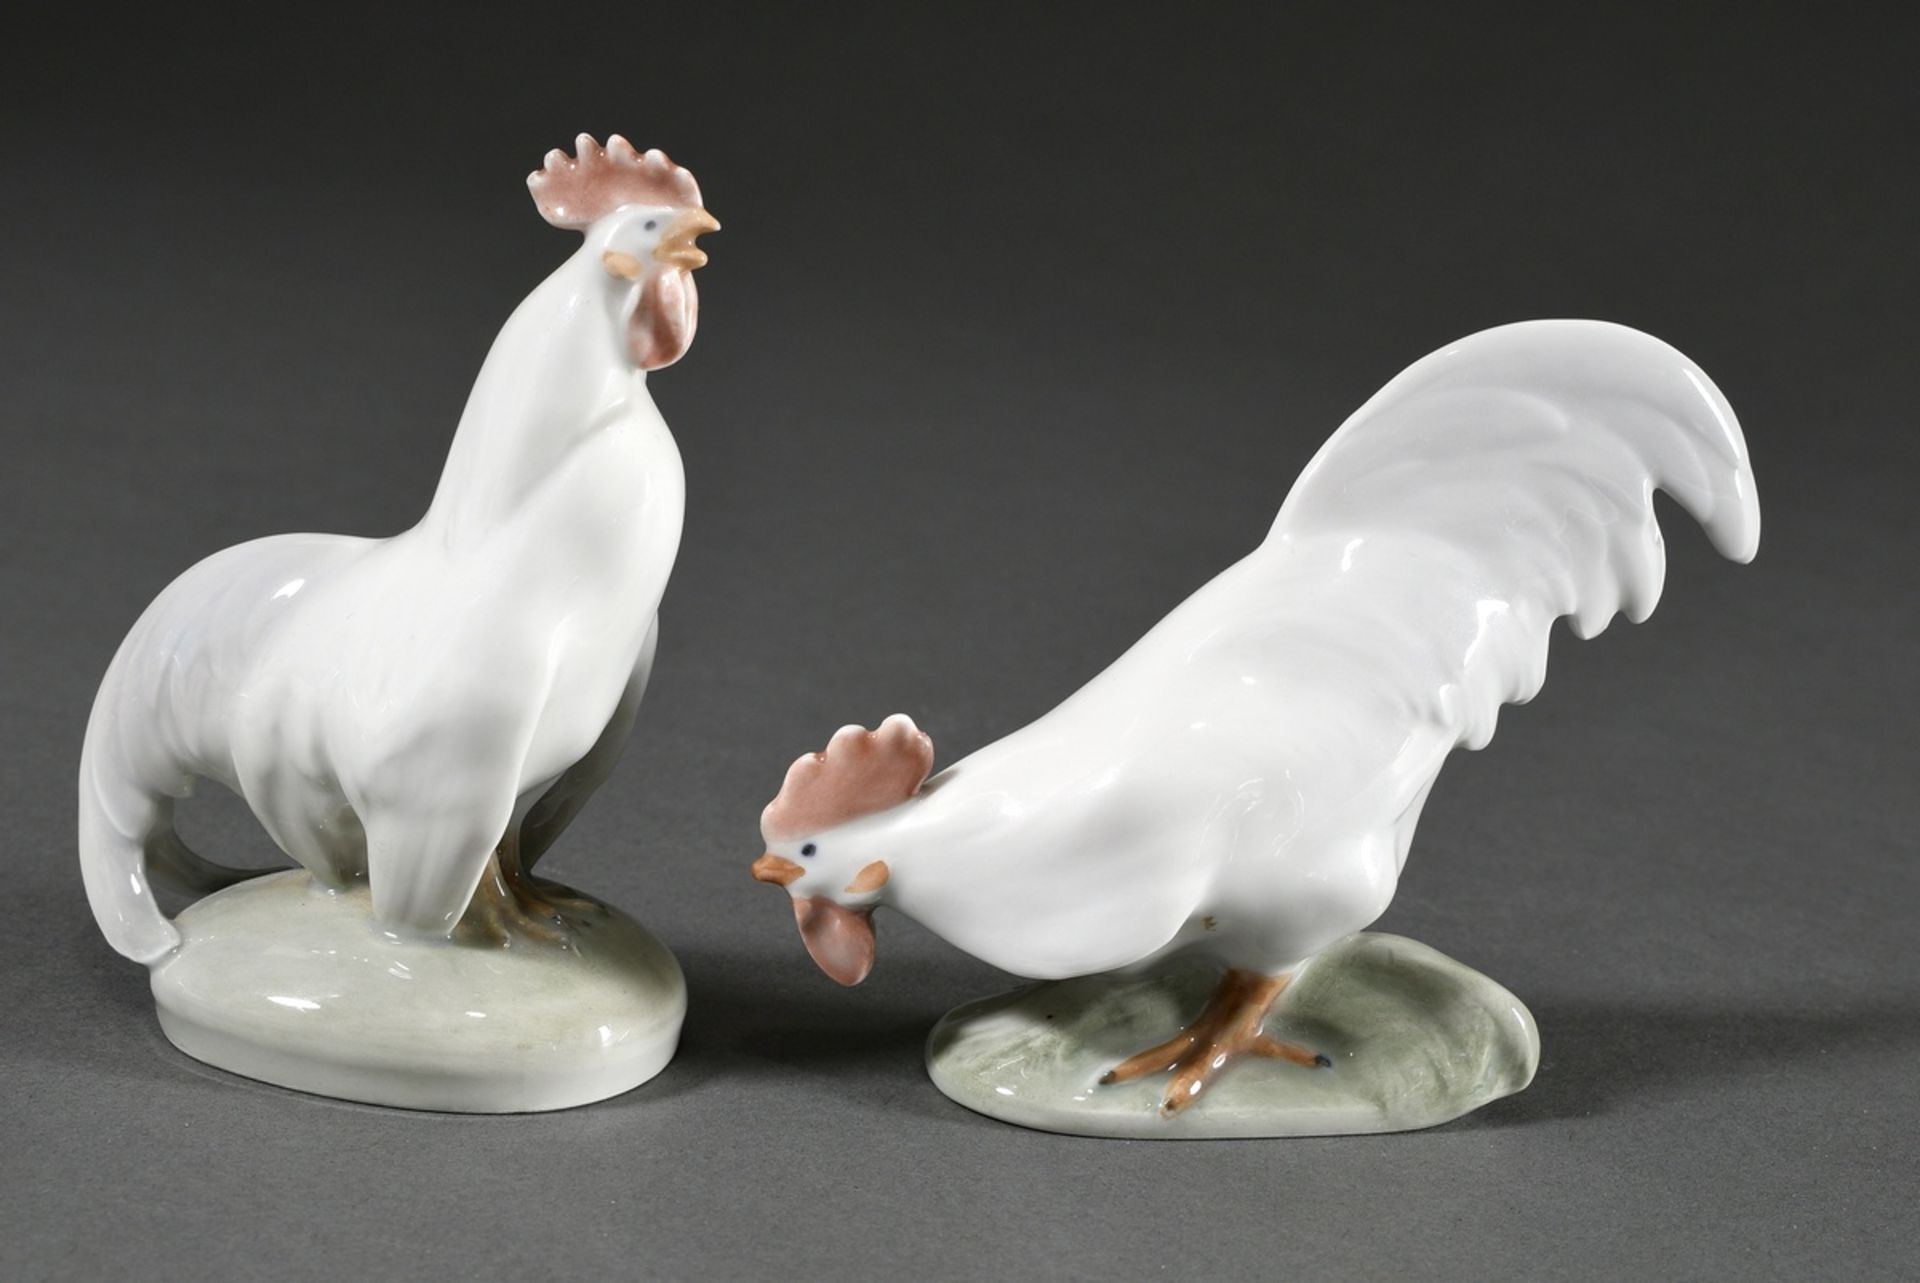 4 Various Royal Copenhagen figurines "Chickens" with polychrome underglaze painting, model no. 1024 - Image 5 of 7